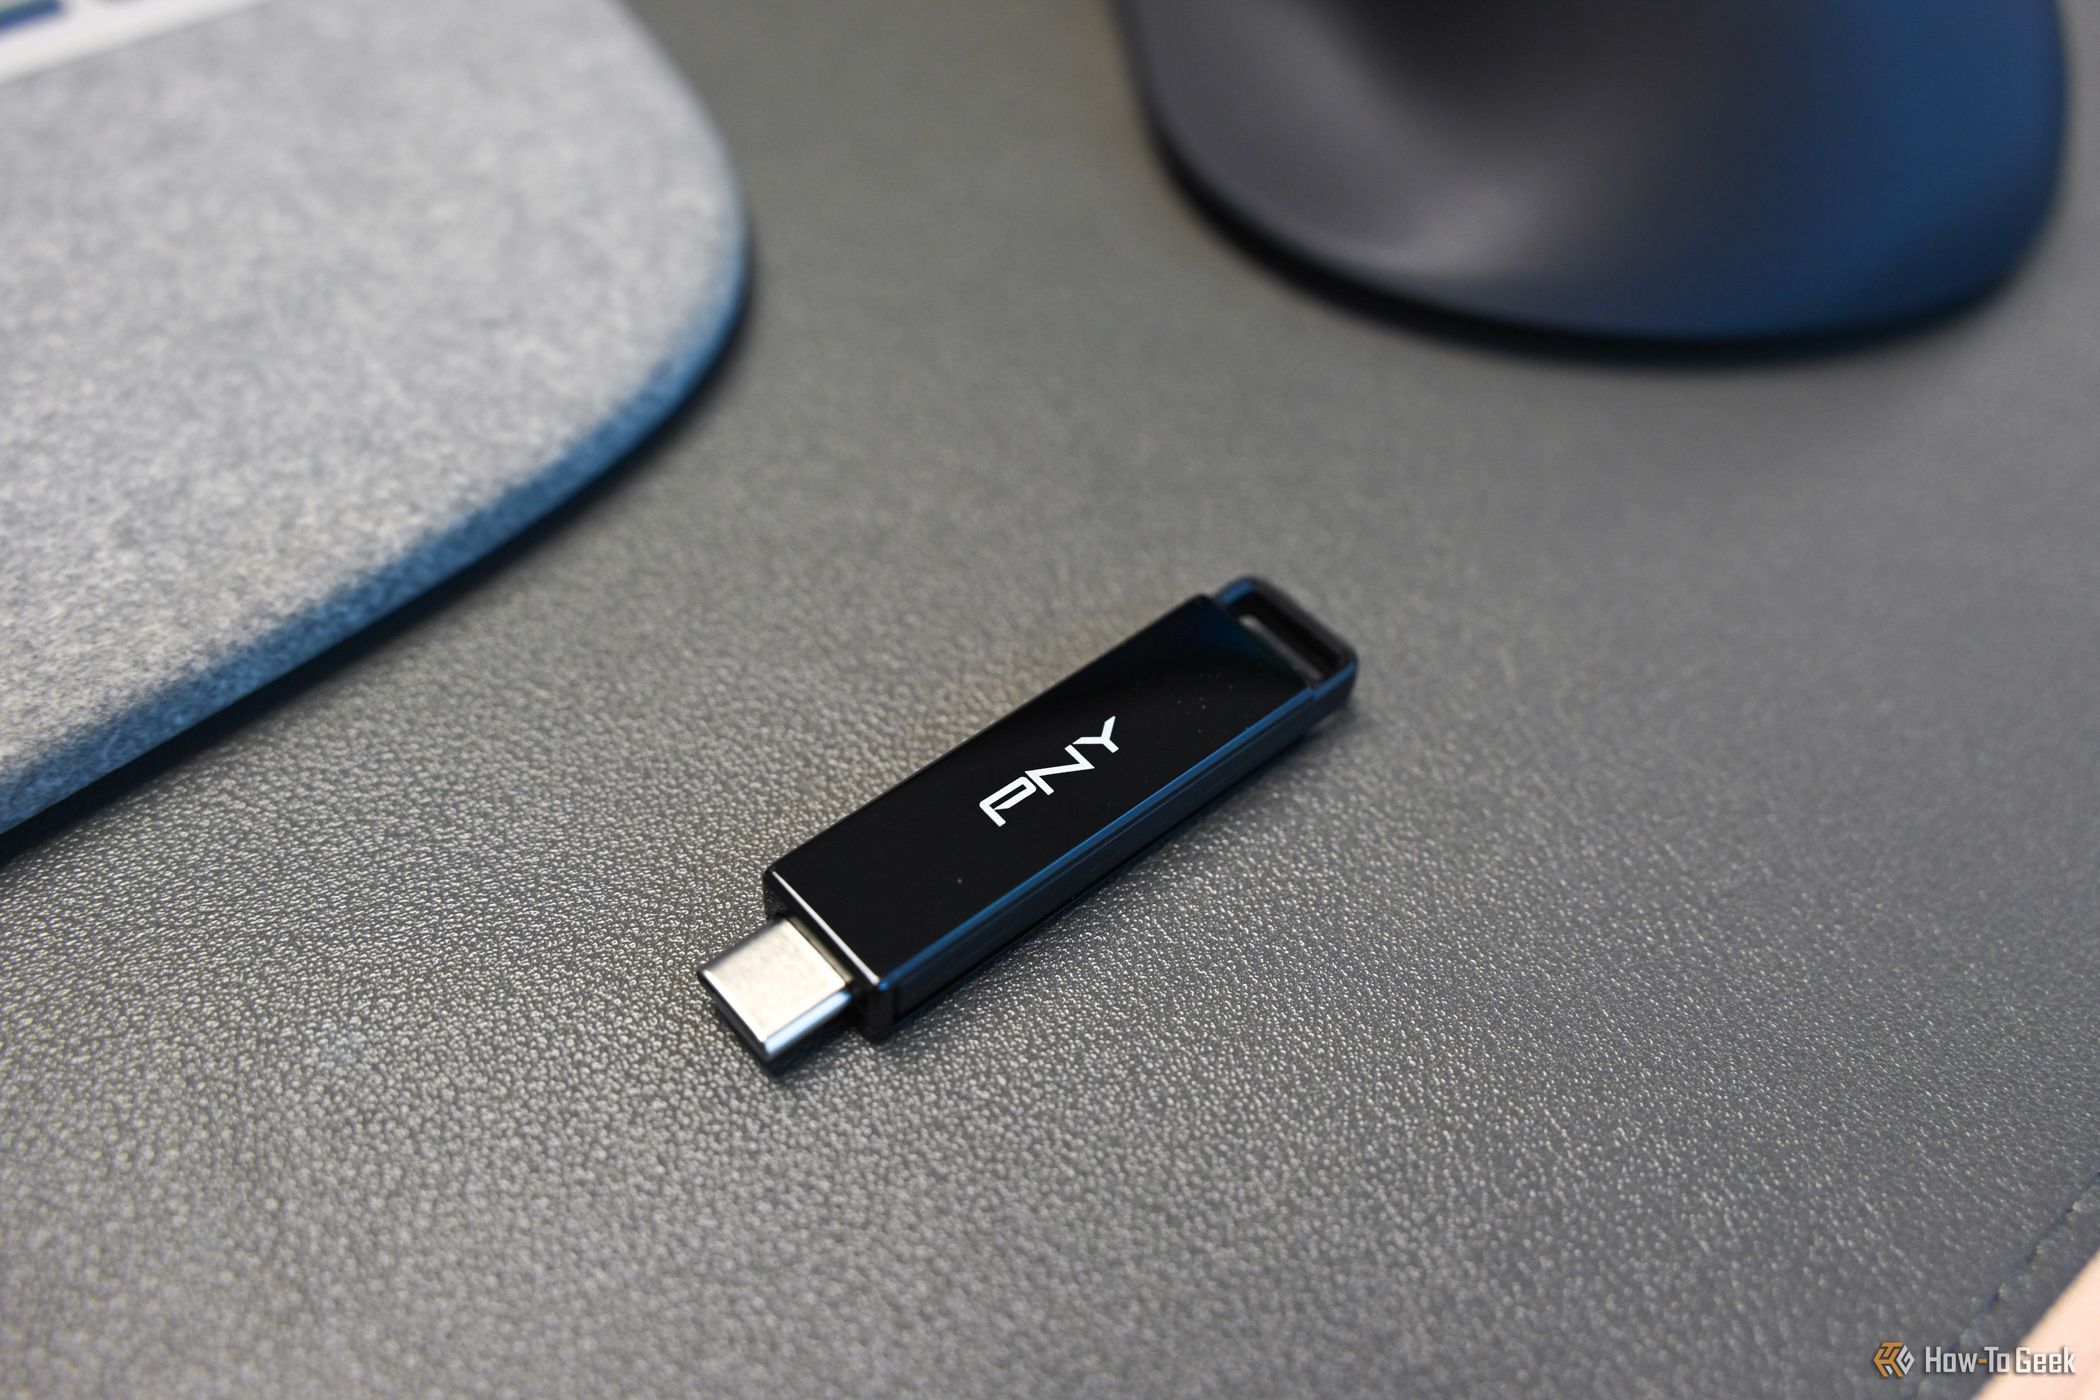 The PNY Elite-X Type C Flash Drive in the open position